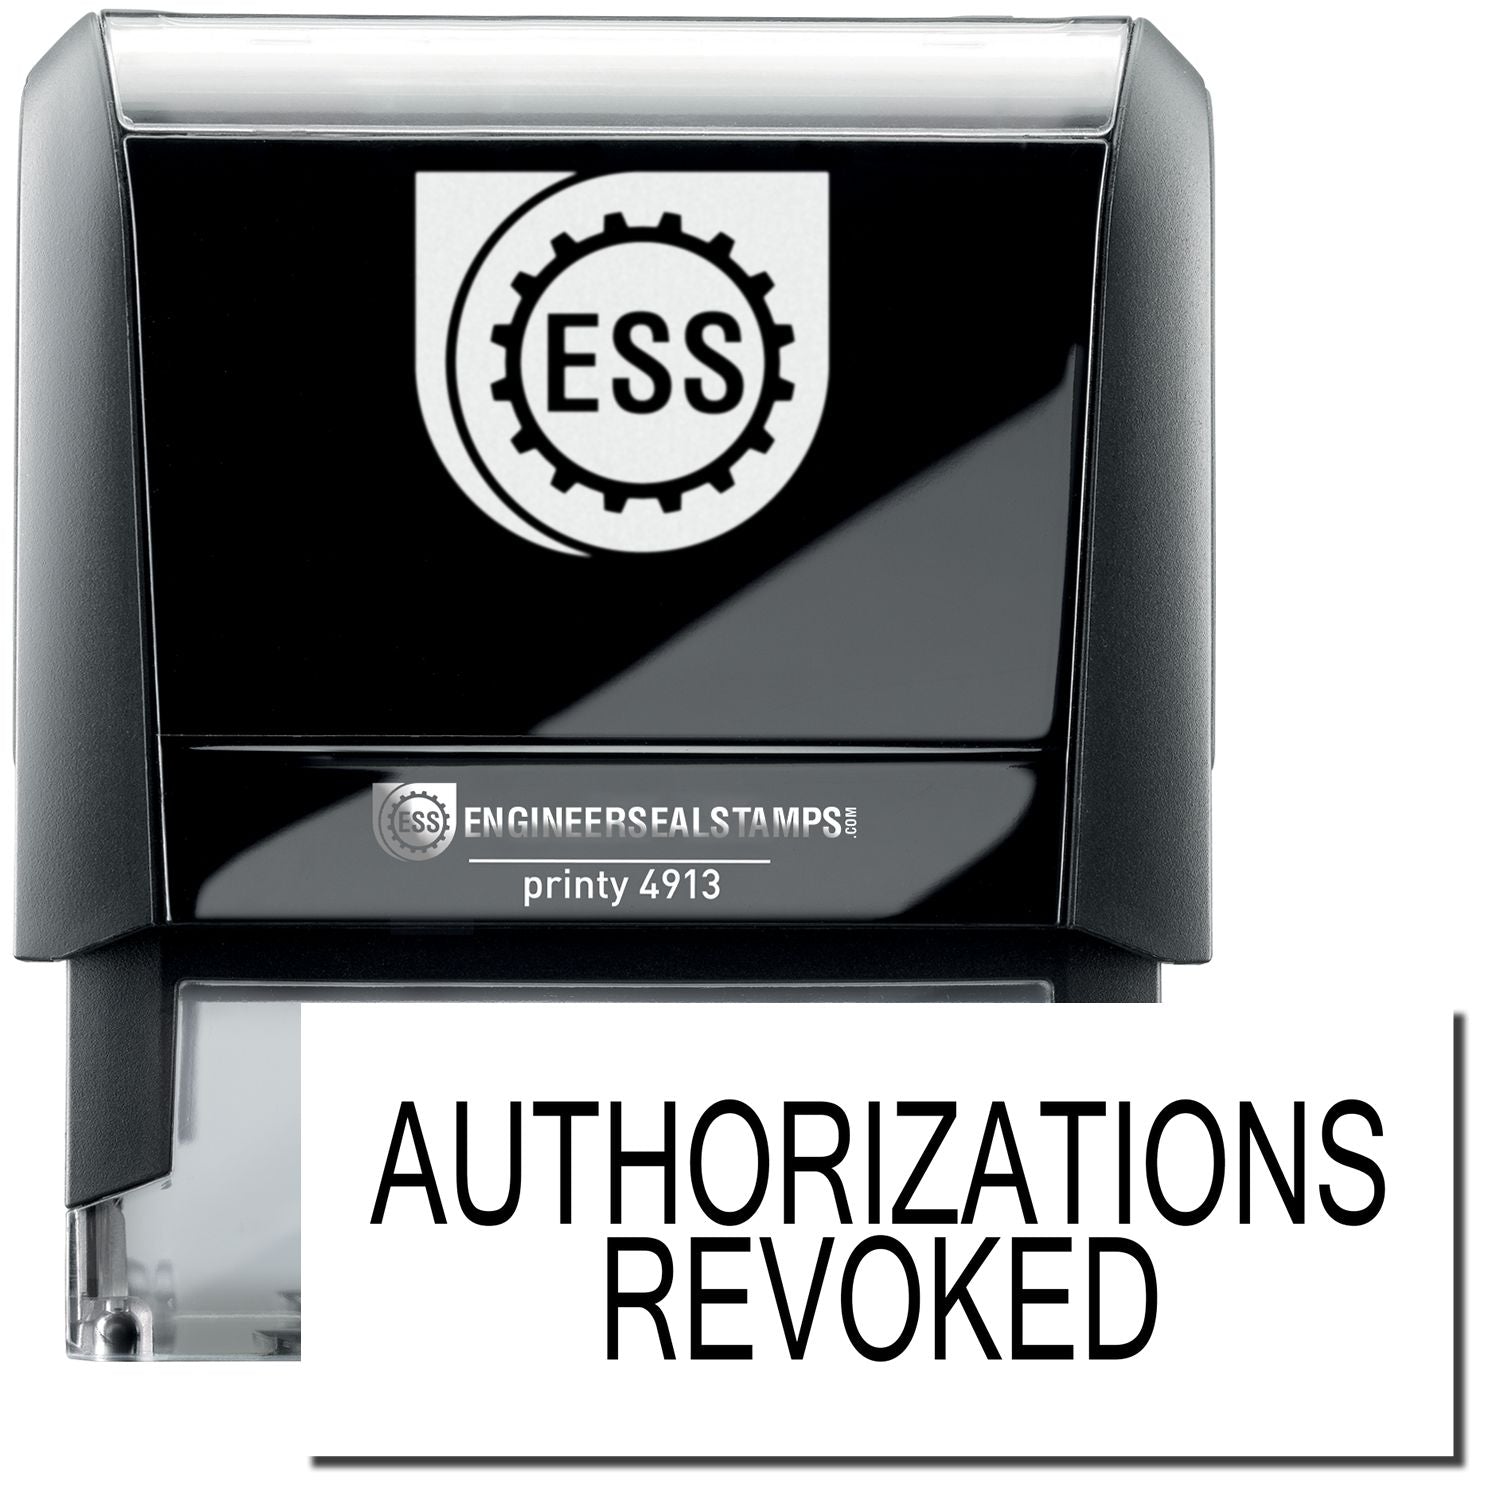 A self-inking stamp with a stamped image showing how the text "AUTHORIZATIONS REVOKED" in a large bold font is displayed by it.